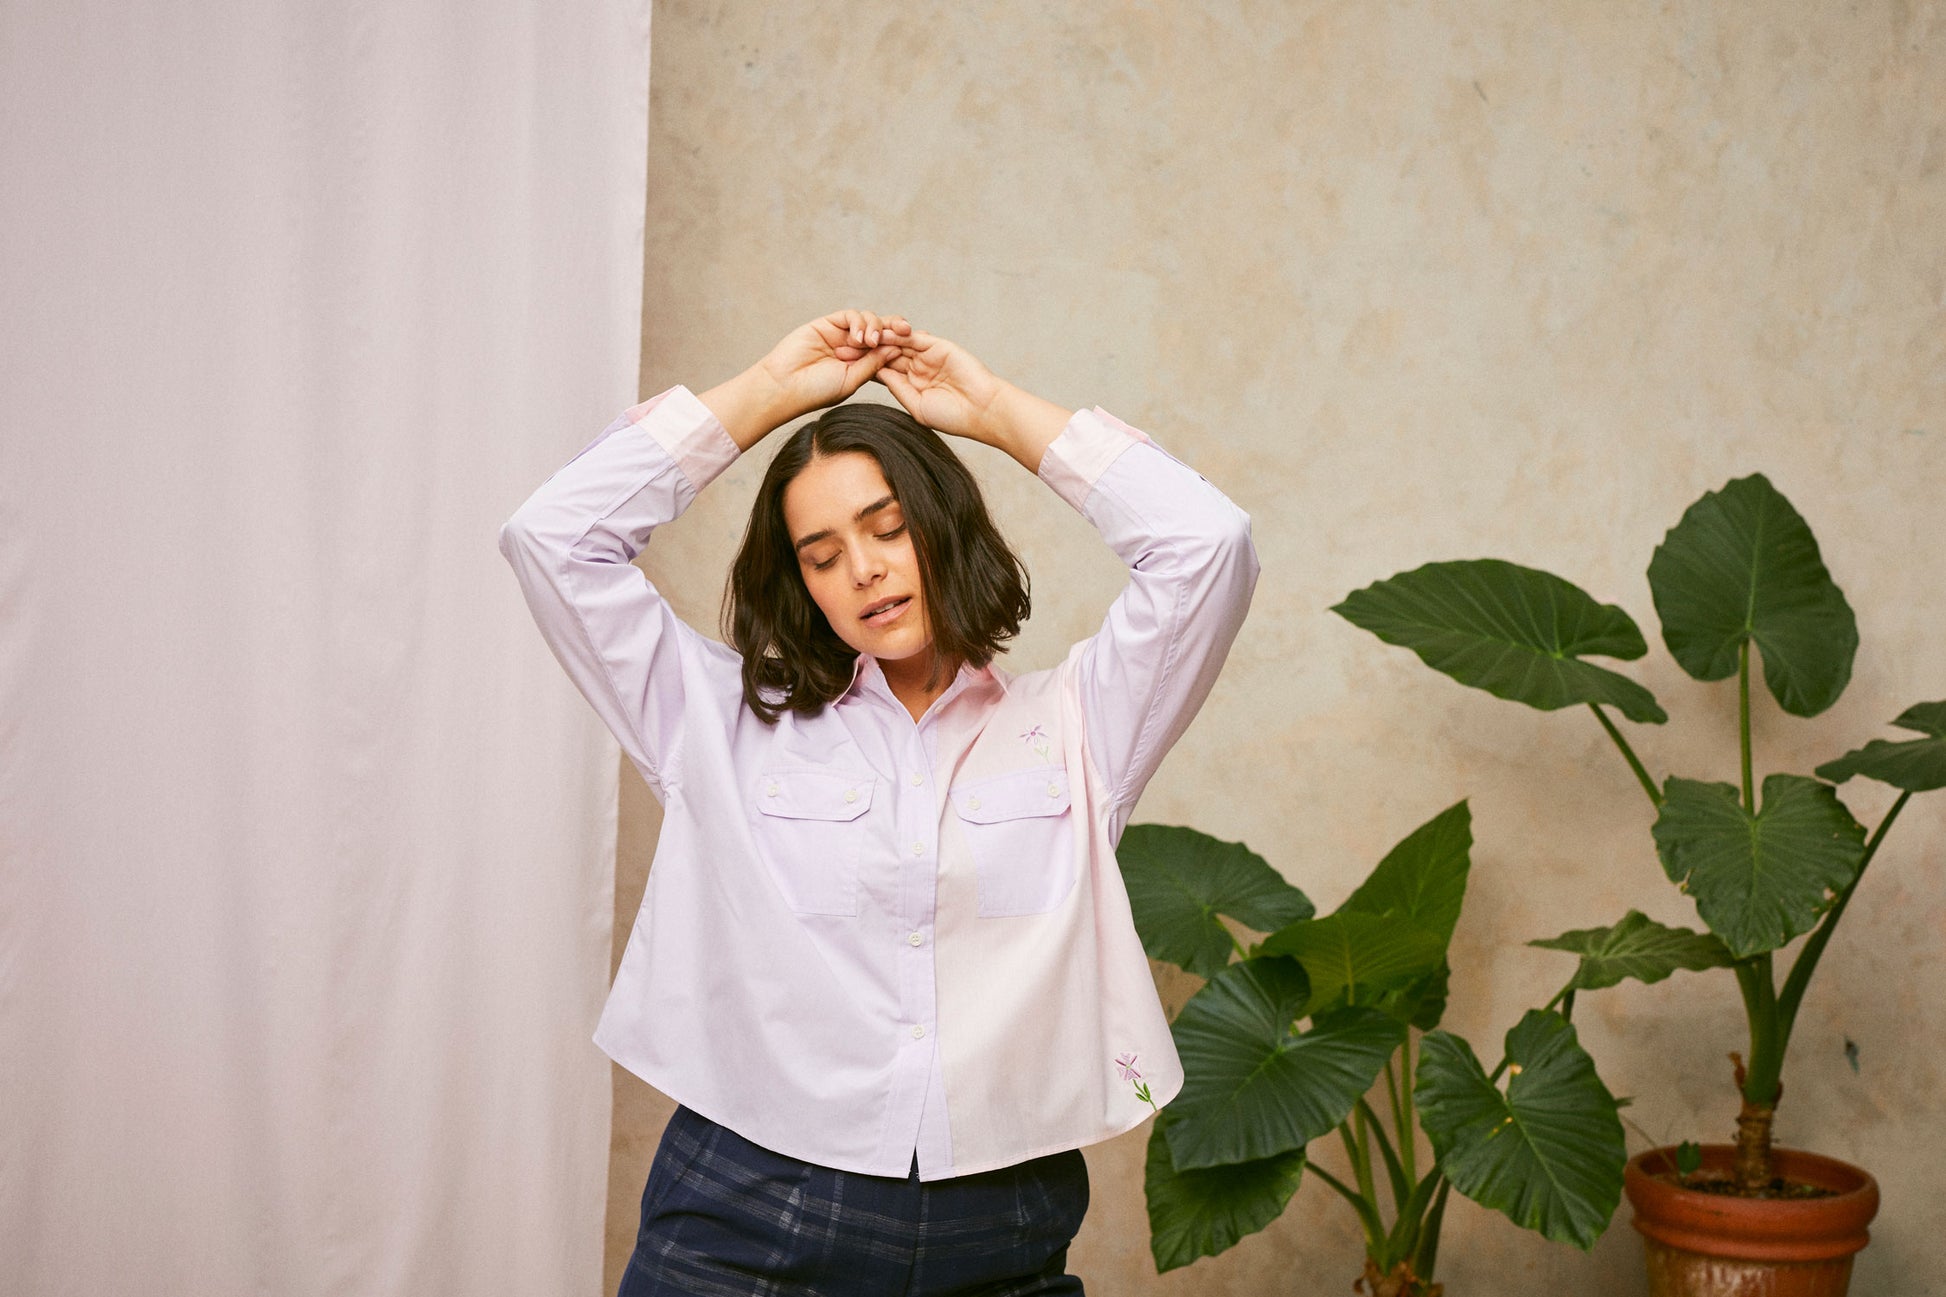 Model wears the Jules Utility Shirt: colourblocked pink and lilac shirt with a boxy silhouette. Jules Shirt from Saywood with embroidered flower detail and utility style pockets. Worn with a navy check trouser, she stands in front of a pink fabric drop and a plant, with her arms above her head.